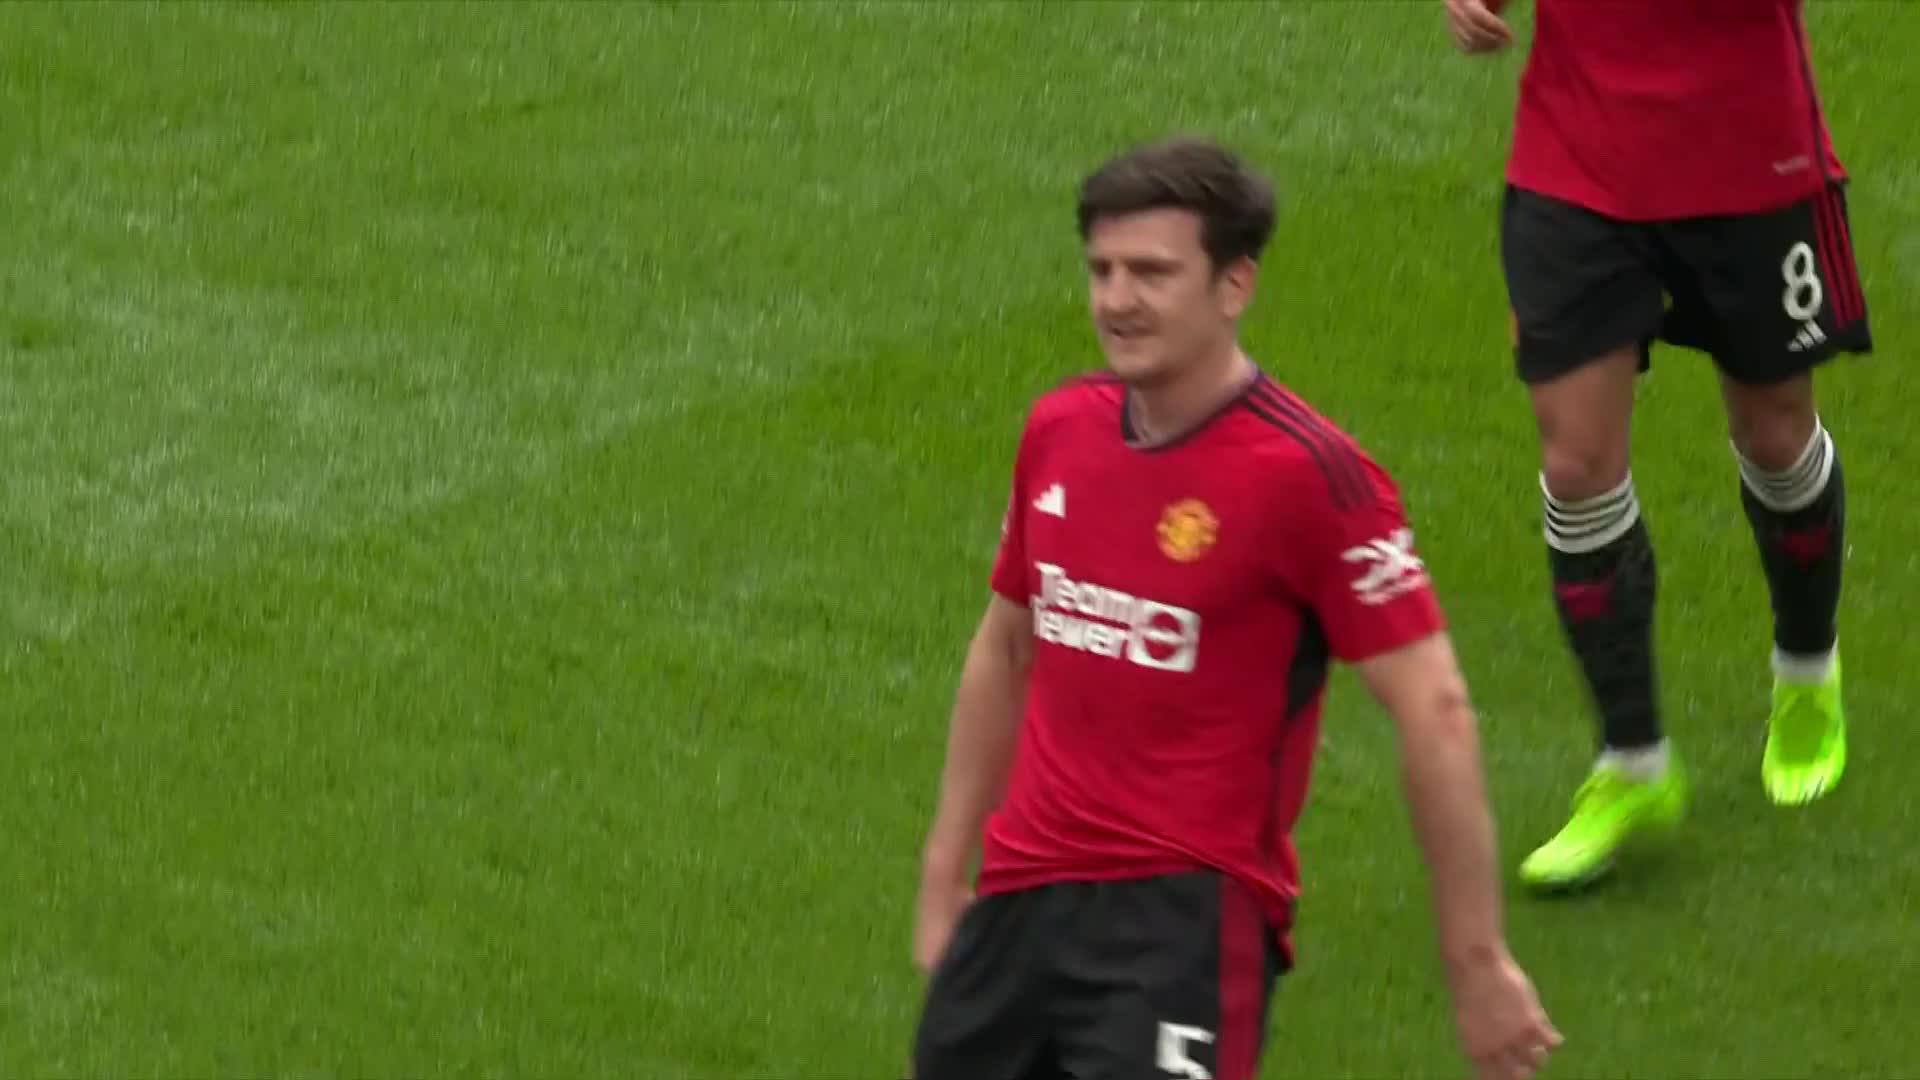 HARRY MAGUIRE 💪The @England and @ManUtd defender rises highest to do what he does best 🤩#EmiratesFACup